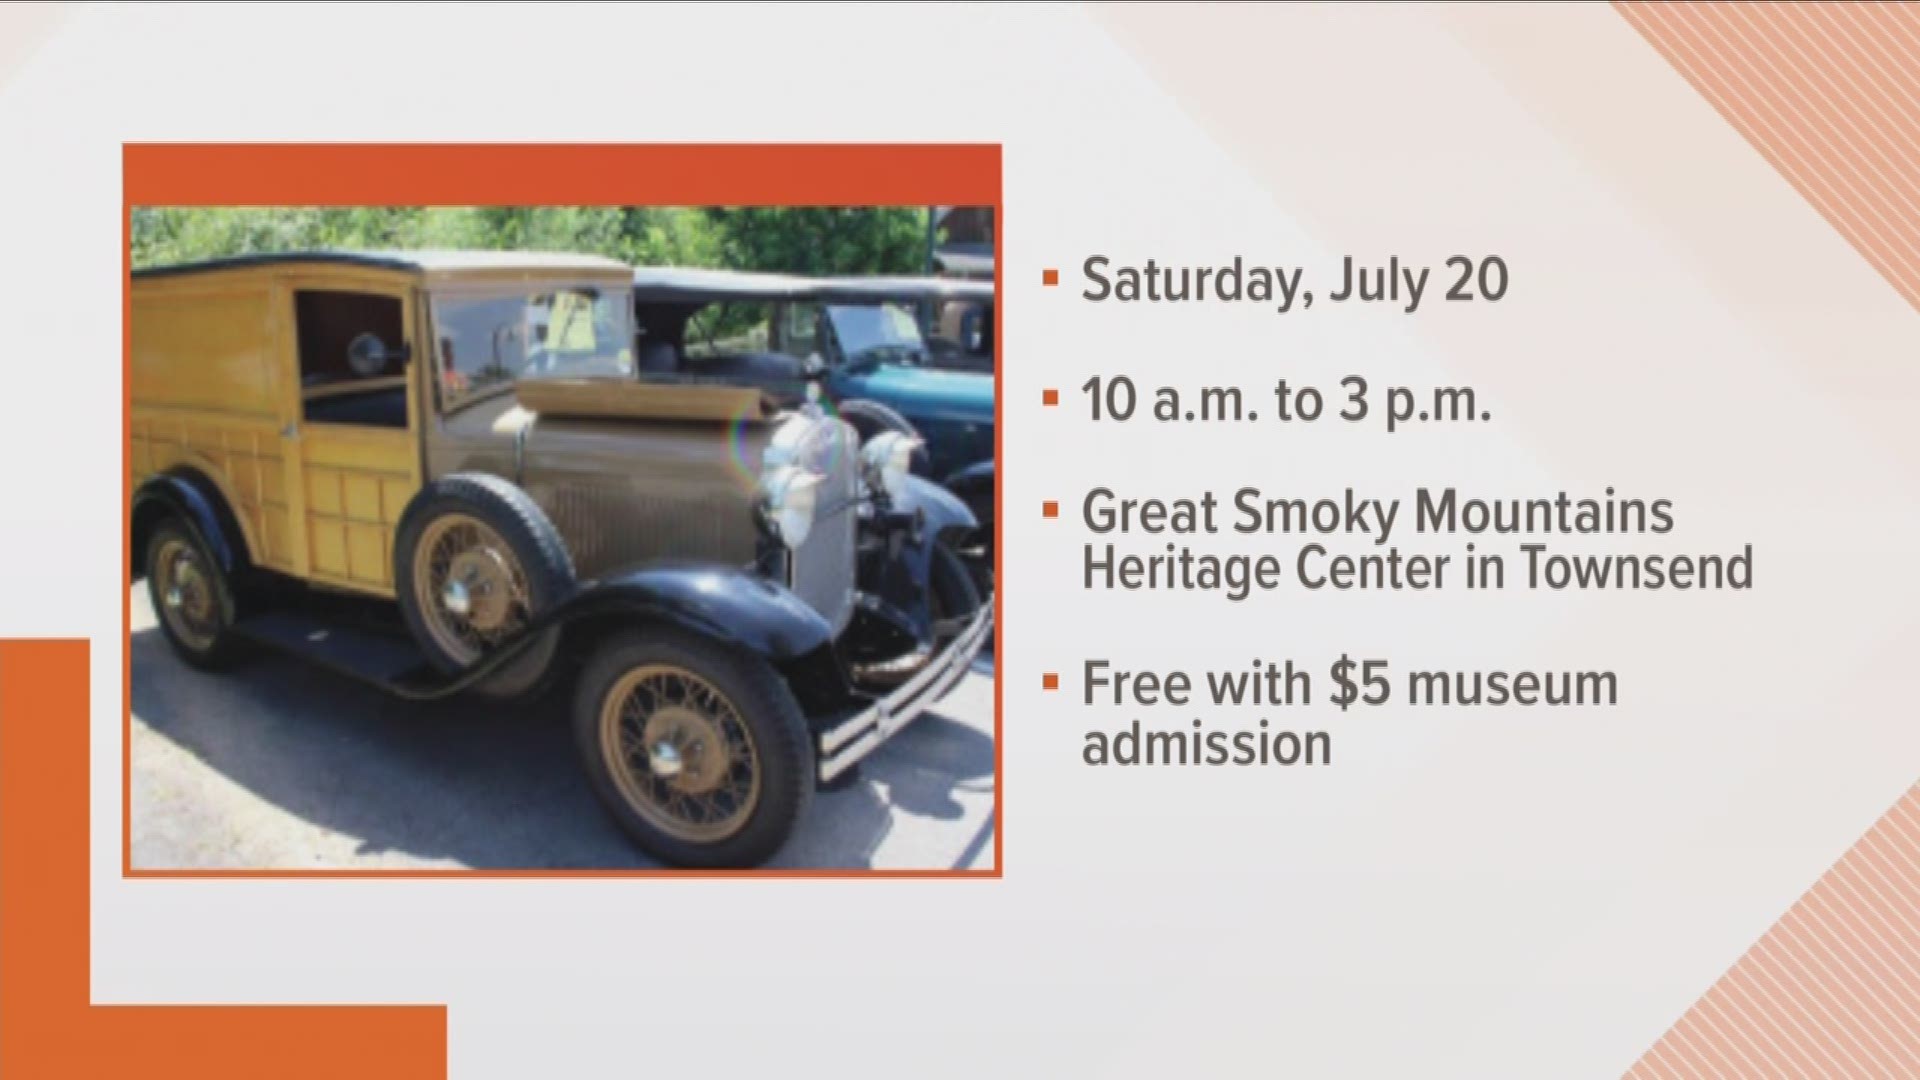 Roger Frazee is here now to talk about the Autos through the Ages show.